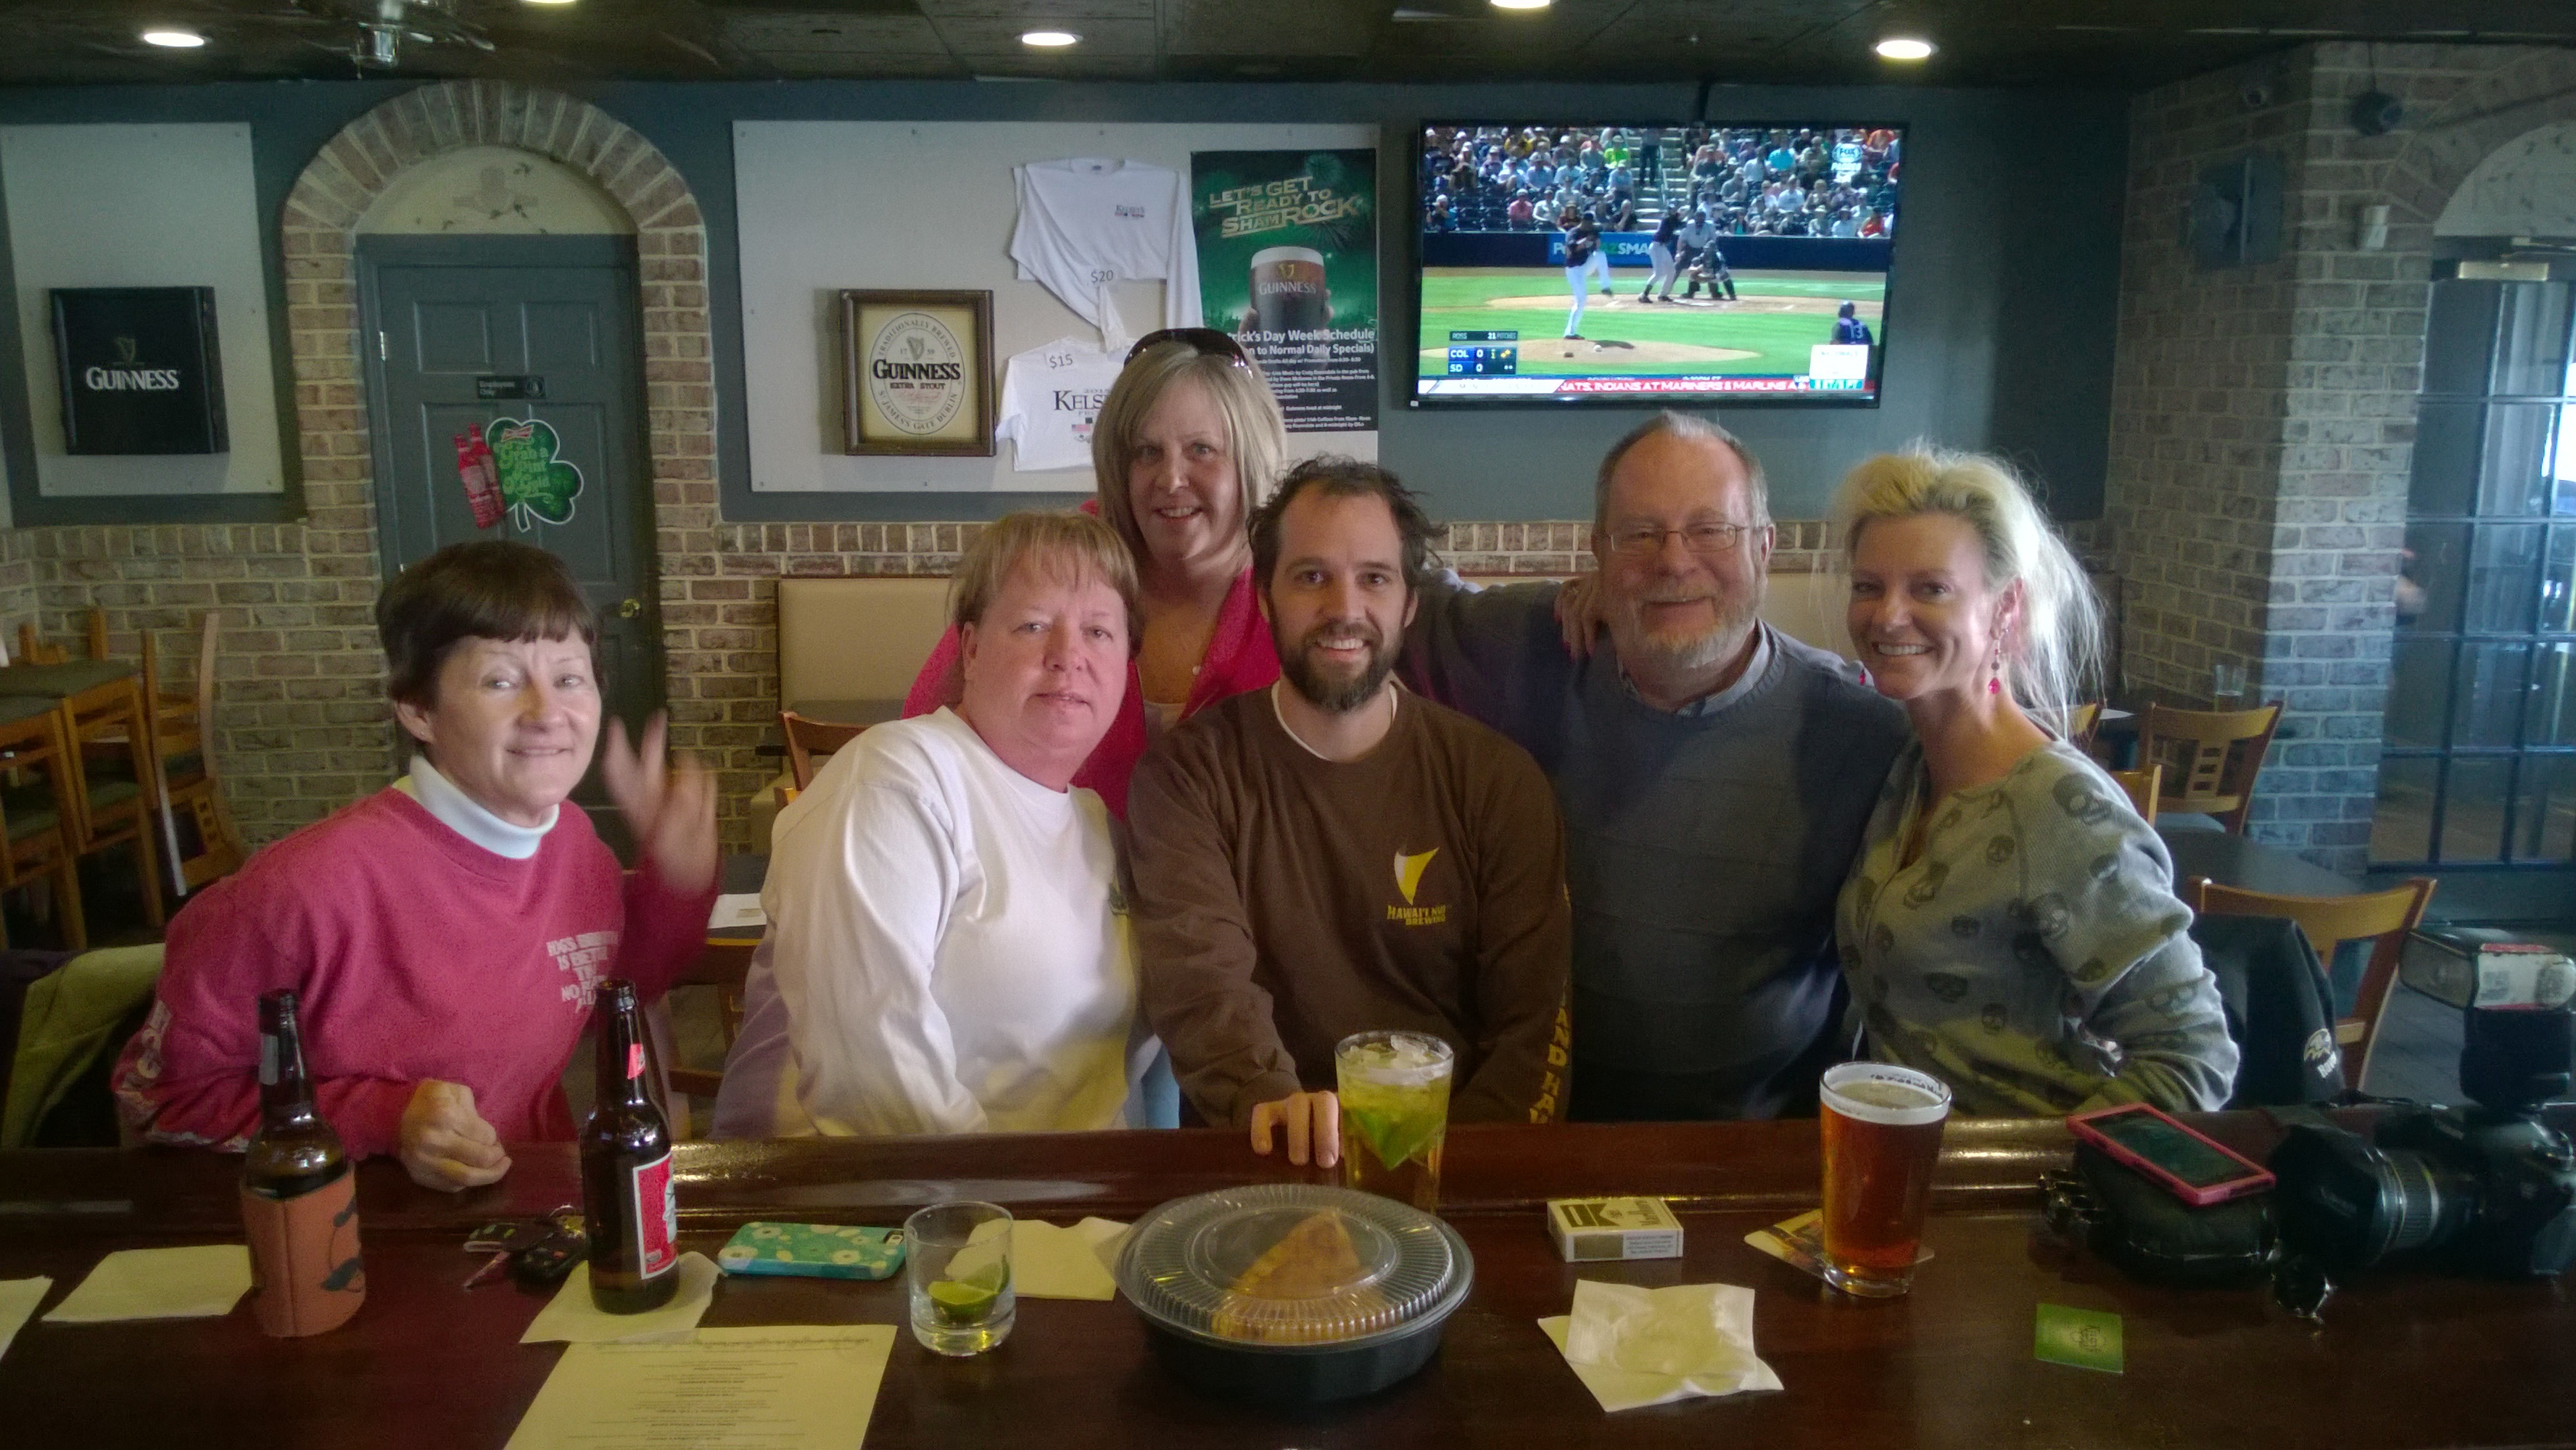 A football-less Sunday at Kelsey’s